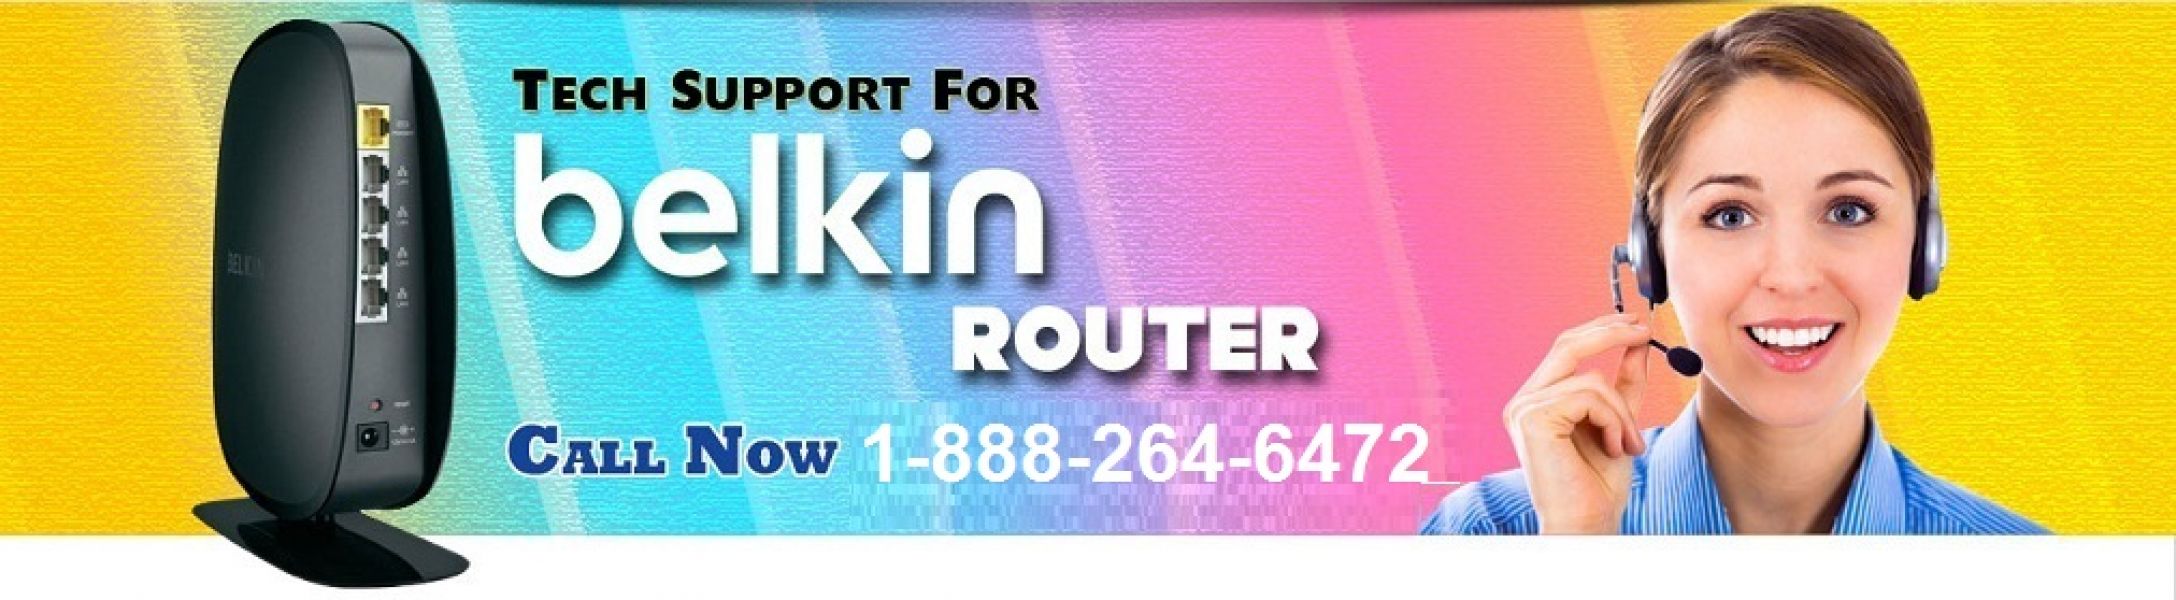 Belkin Router Tech support number 18882646472